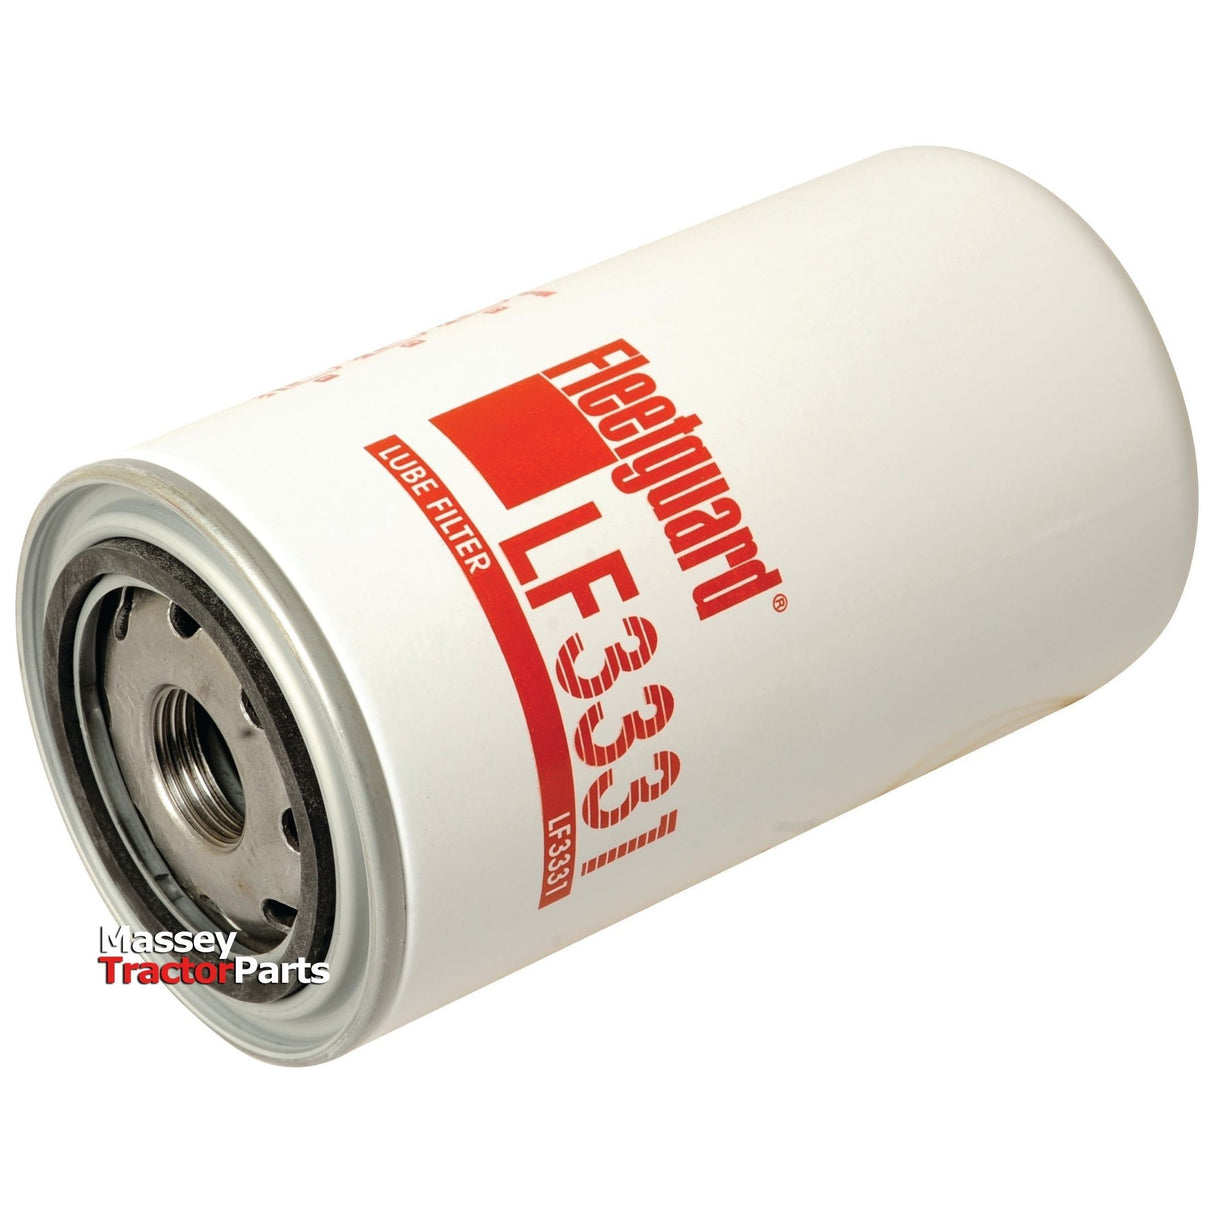 Oil Filter - Spin On - LF3331
 - S.76637 - Massey Tractor Parts